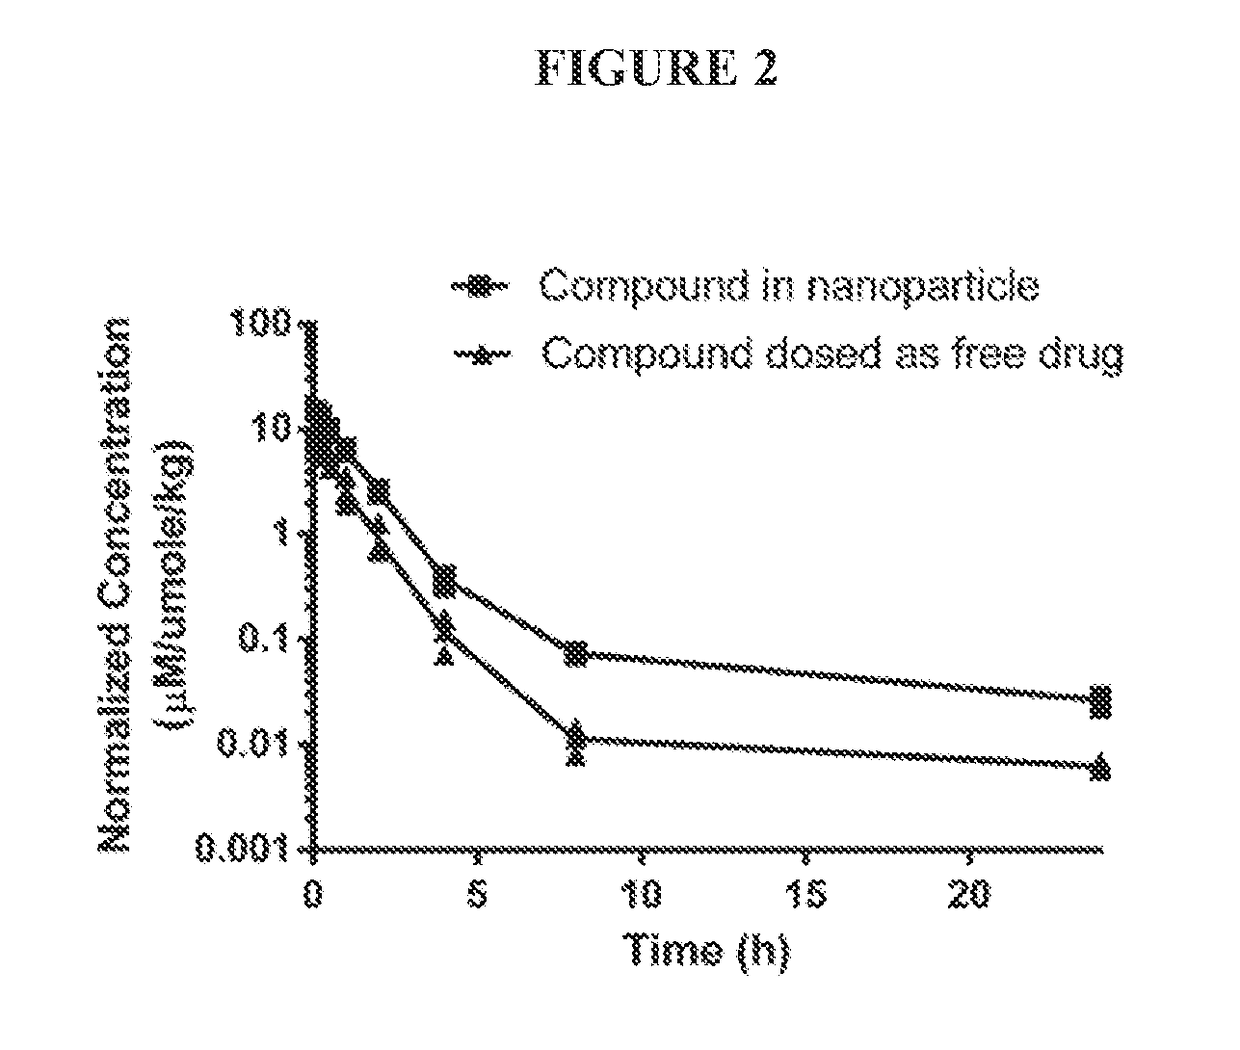 Targeted conjugates and particles and formulations thereof